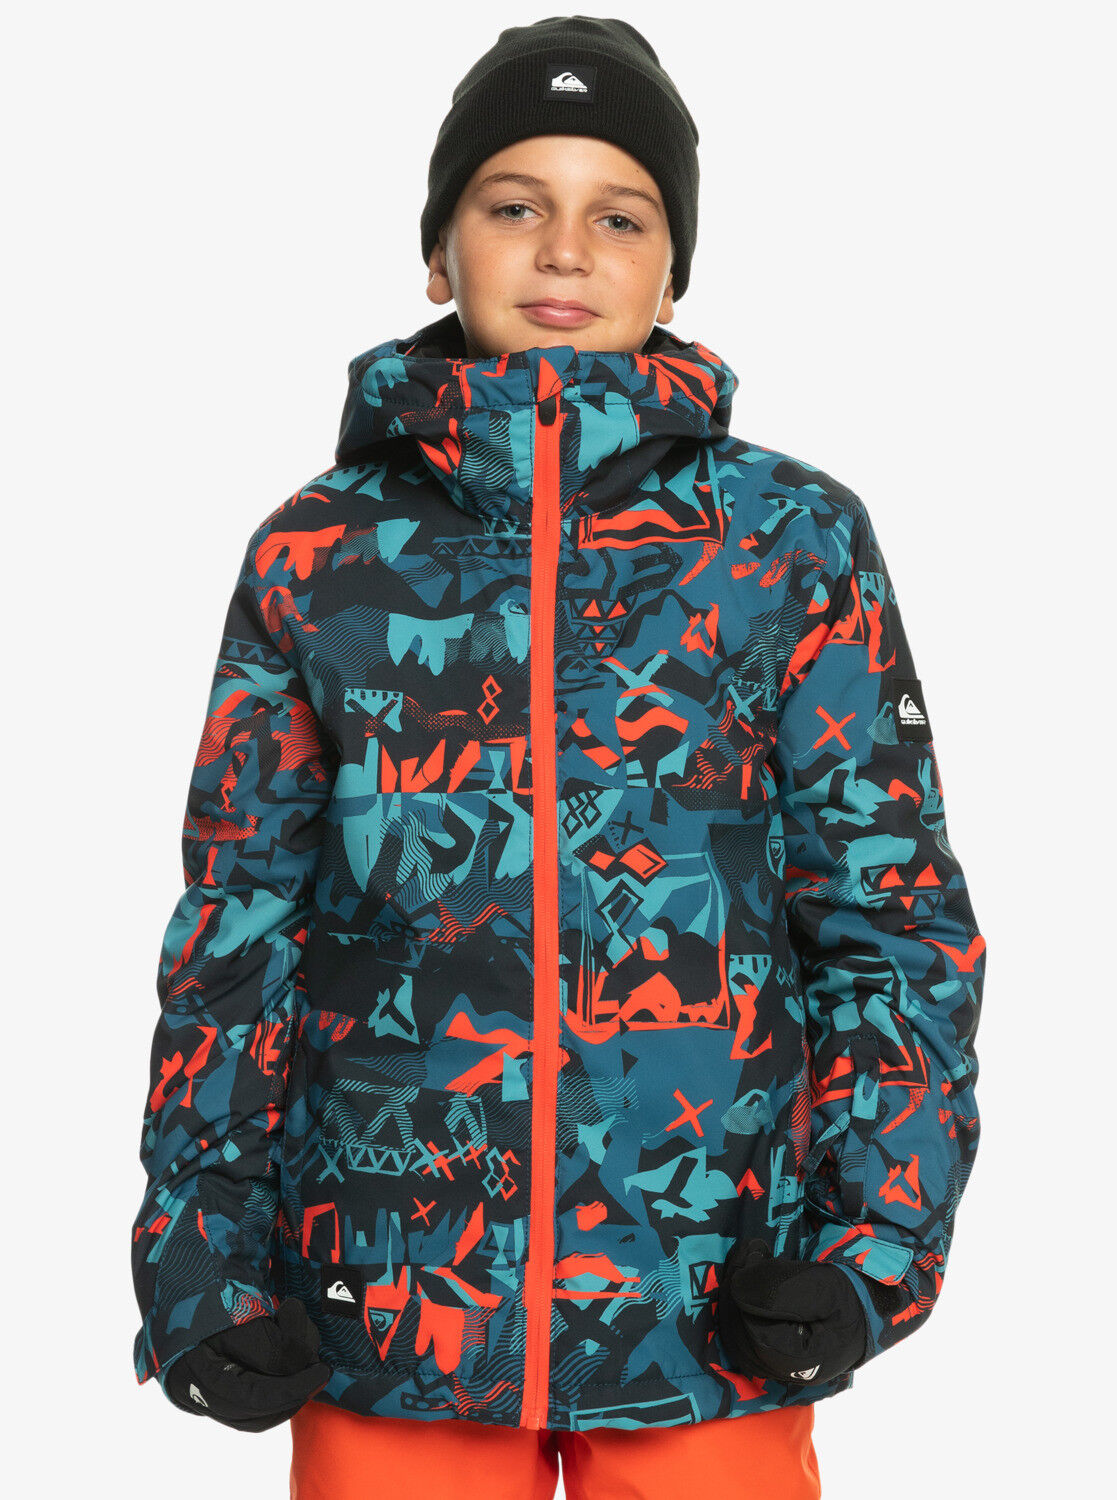 Quiksilver Mission Printed Youth Jacket - Giacca da sci - Bambino | Hardloop